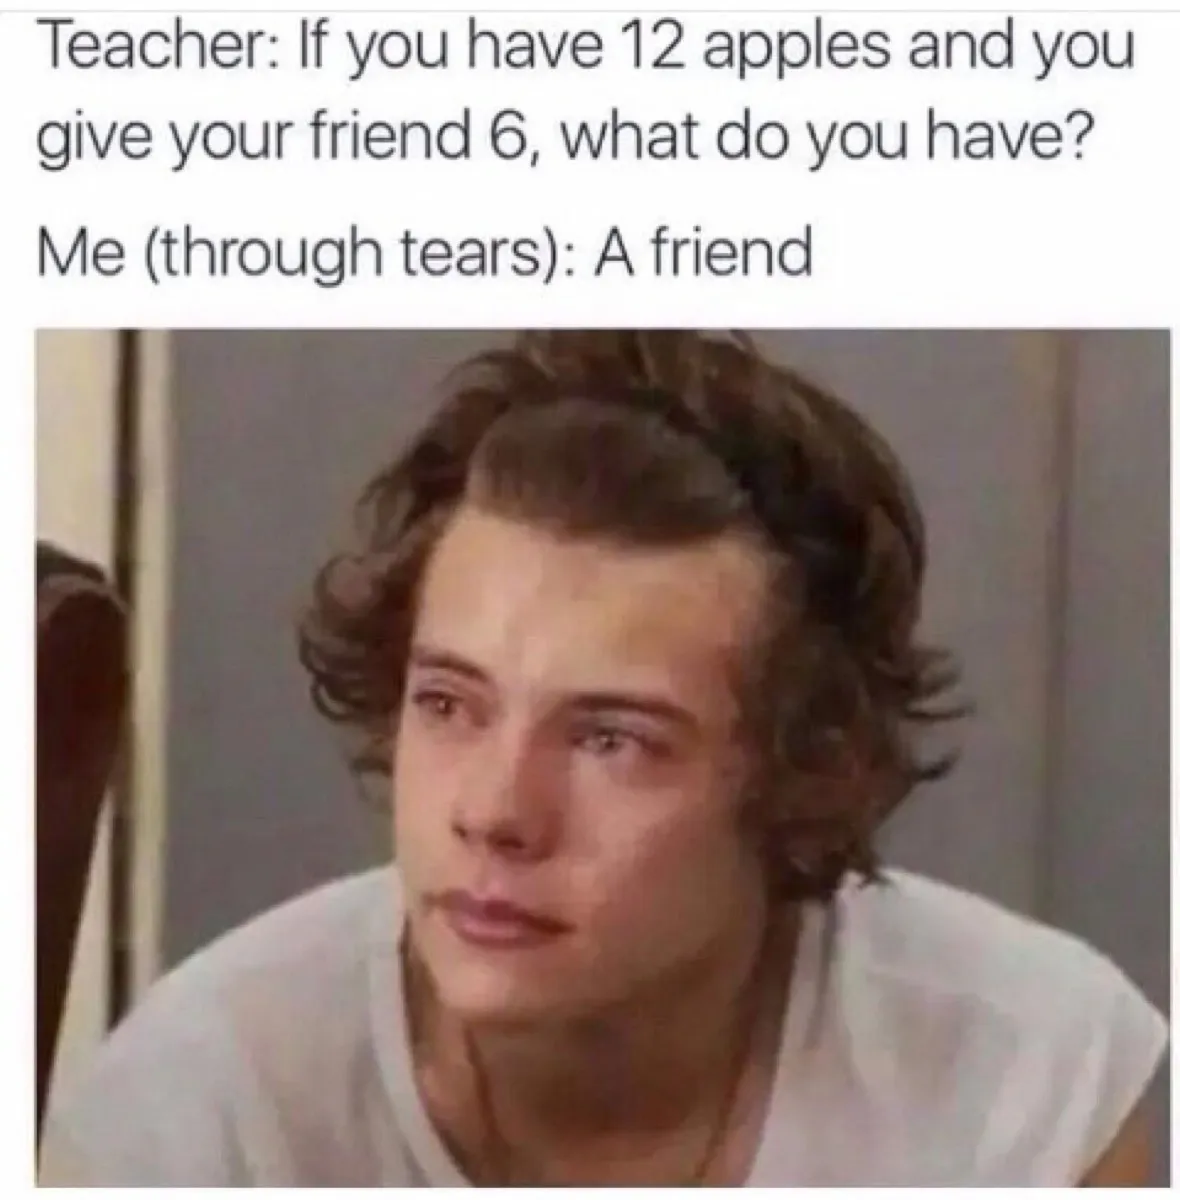 Photo of Harry Styles crying with the caption, "Teacher: If you have 12 apples and you give your friend 6, what do you have? Me (through tears): A friend."